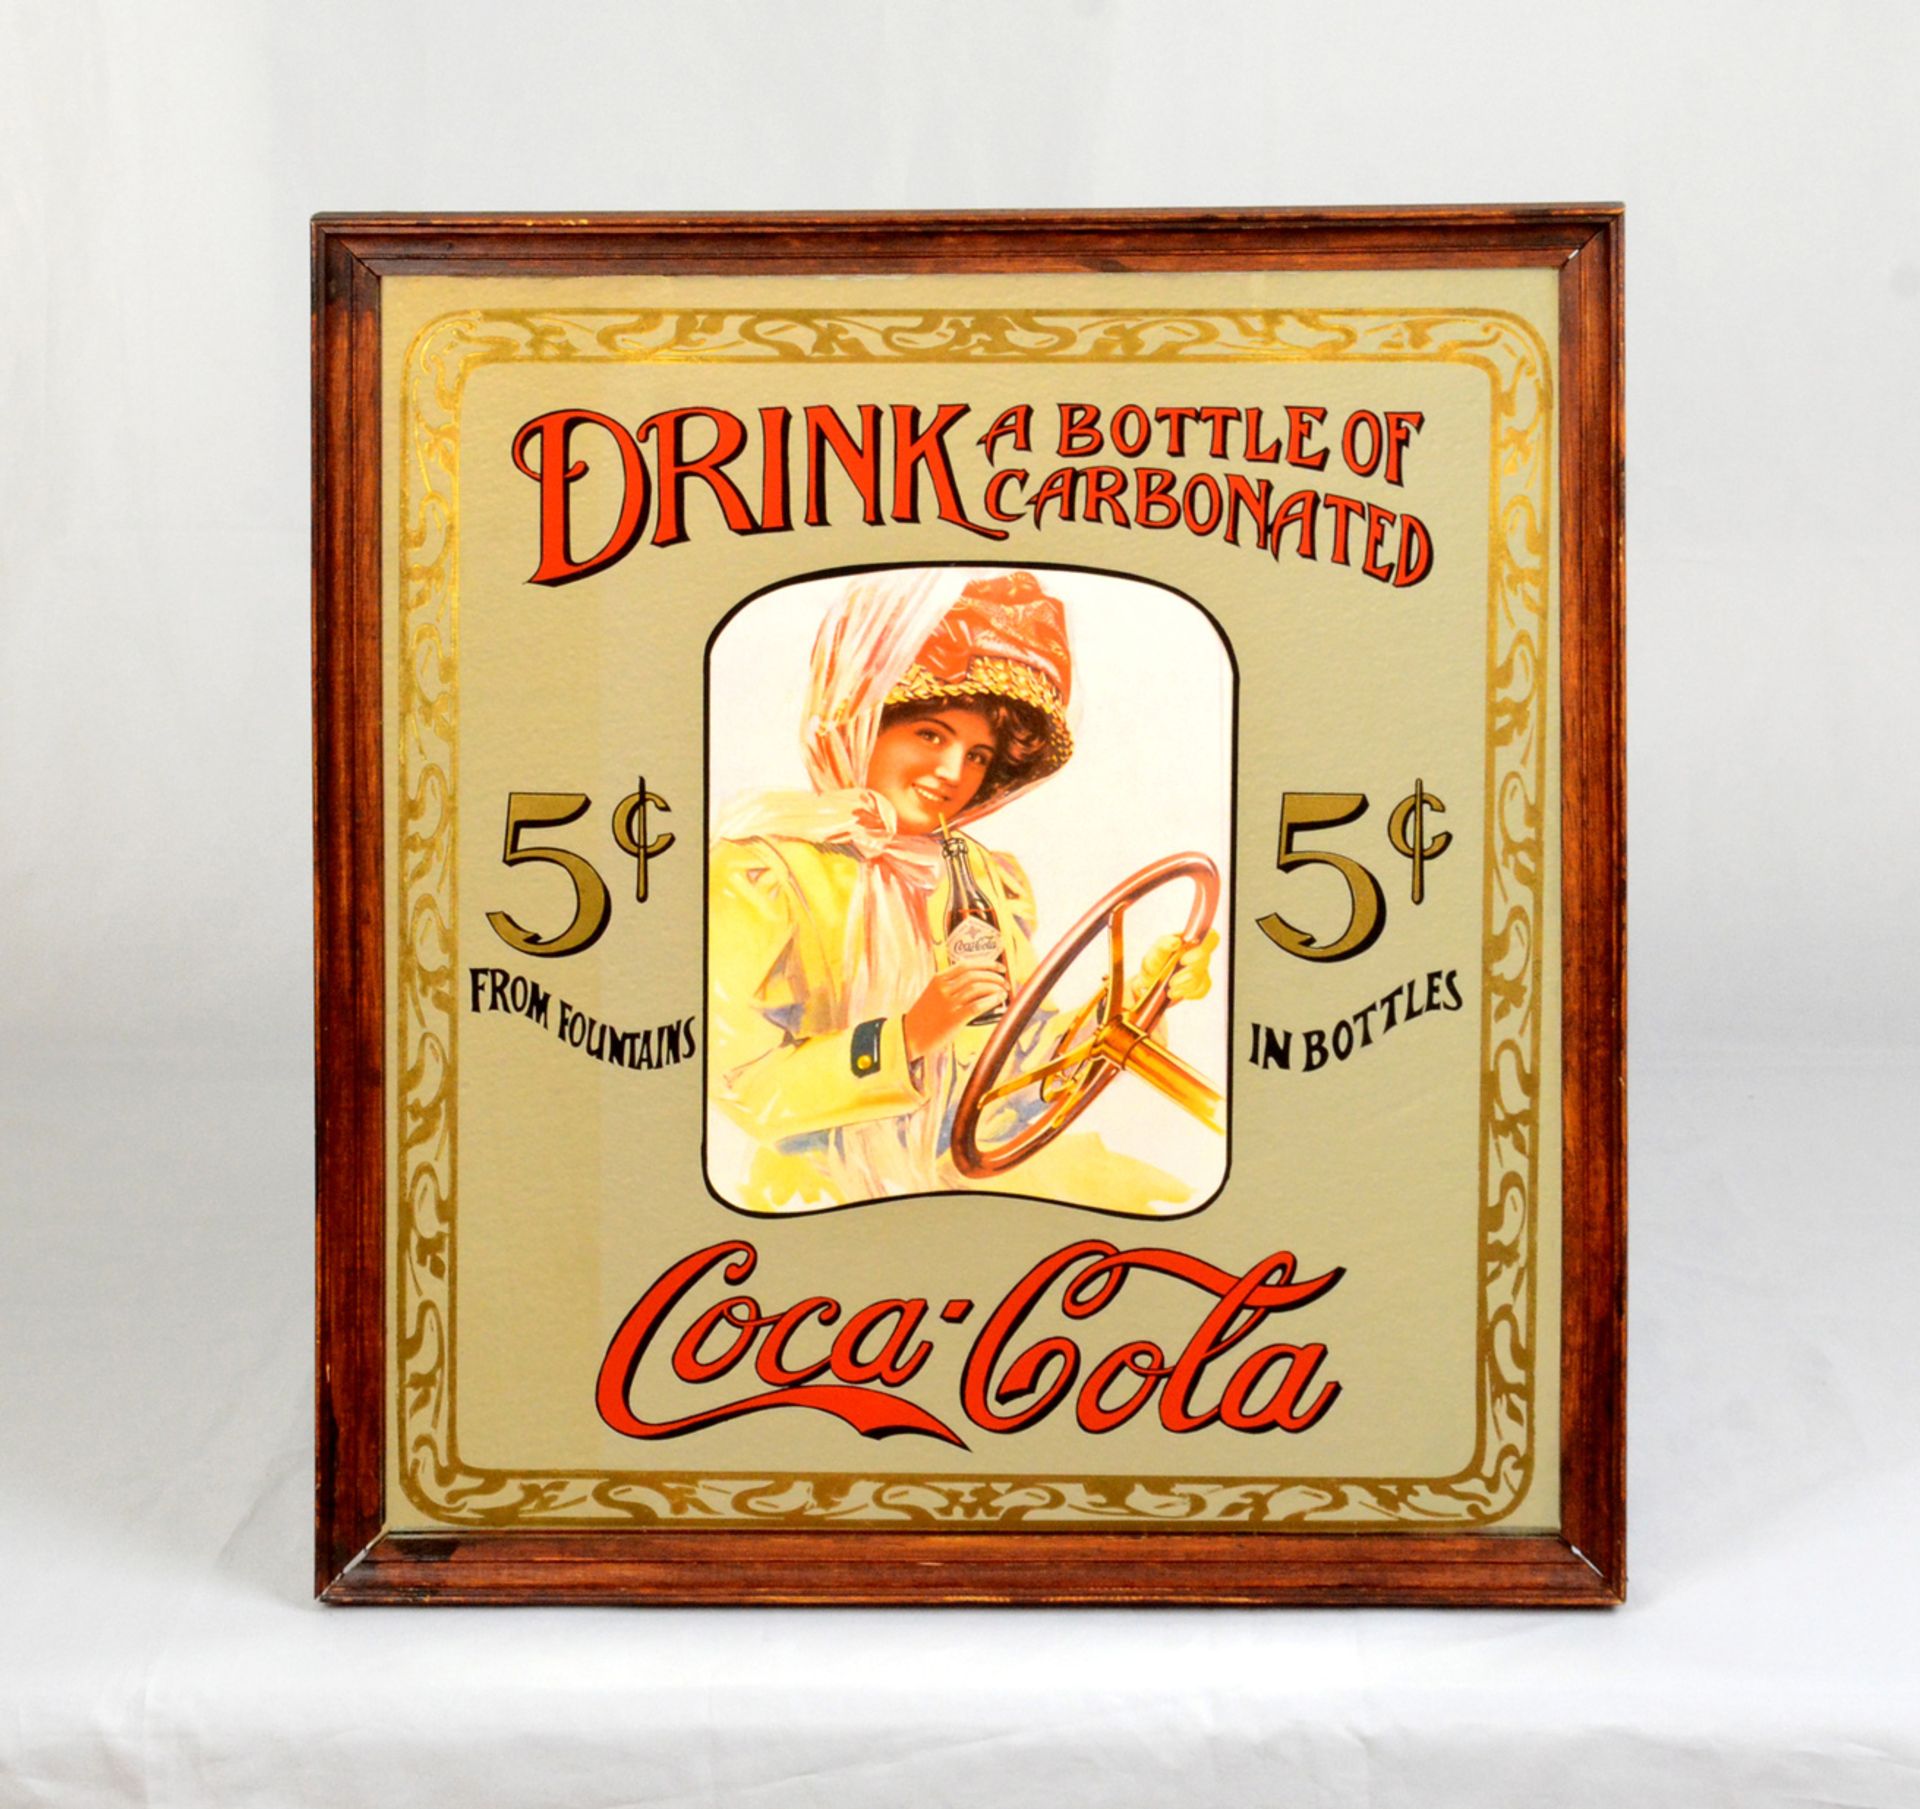 Advertisement on mirror "Drink a bottle of carbonated Coca-Cola"